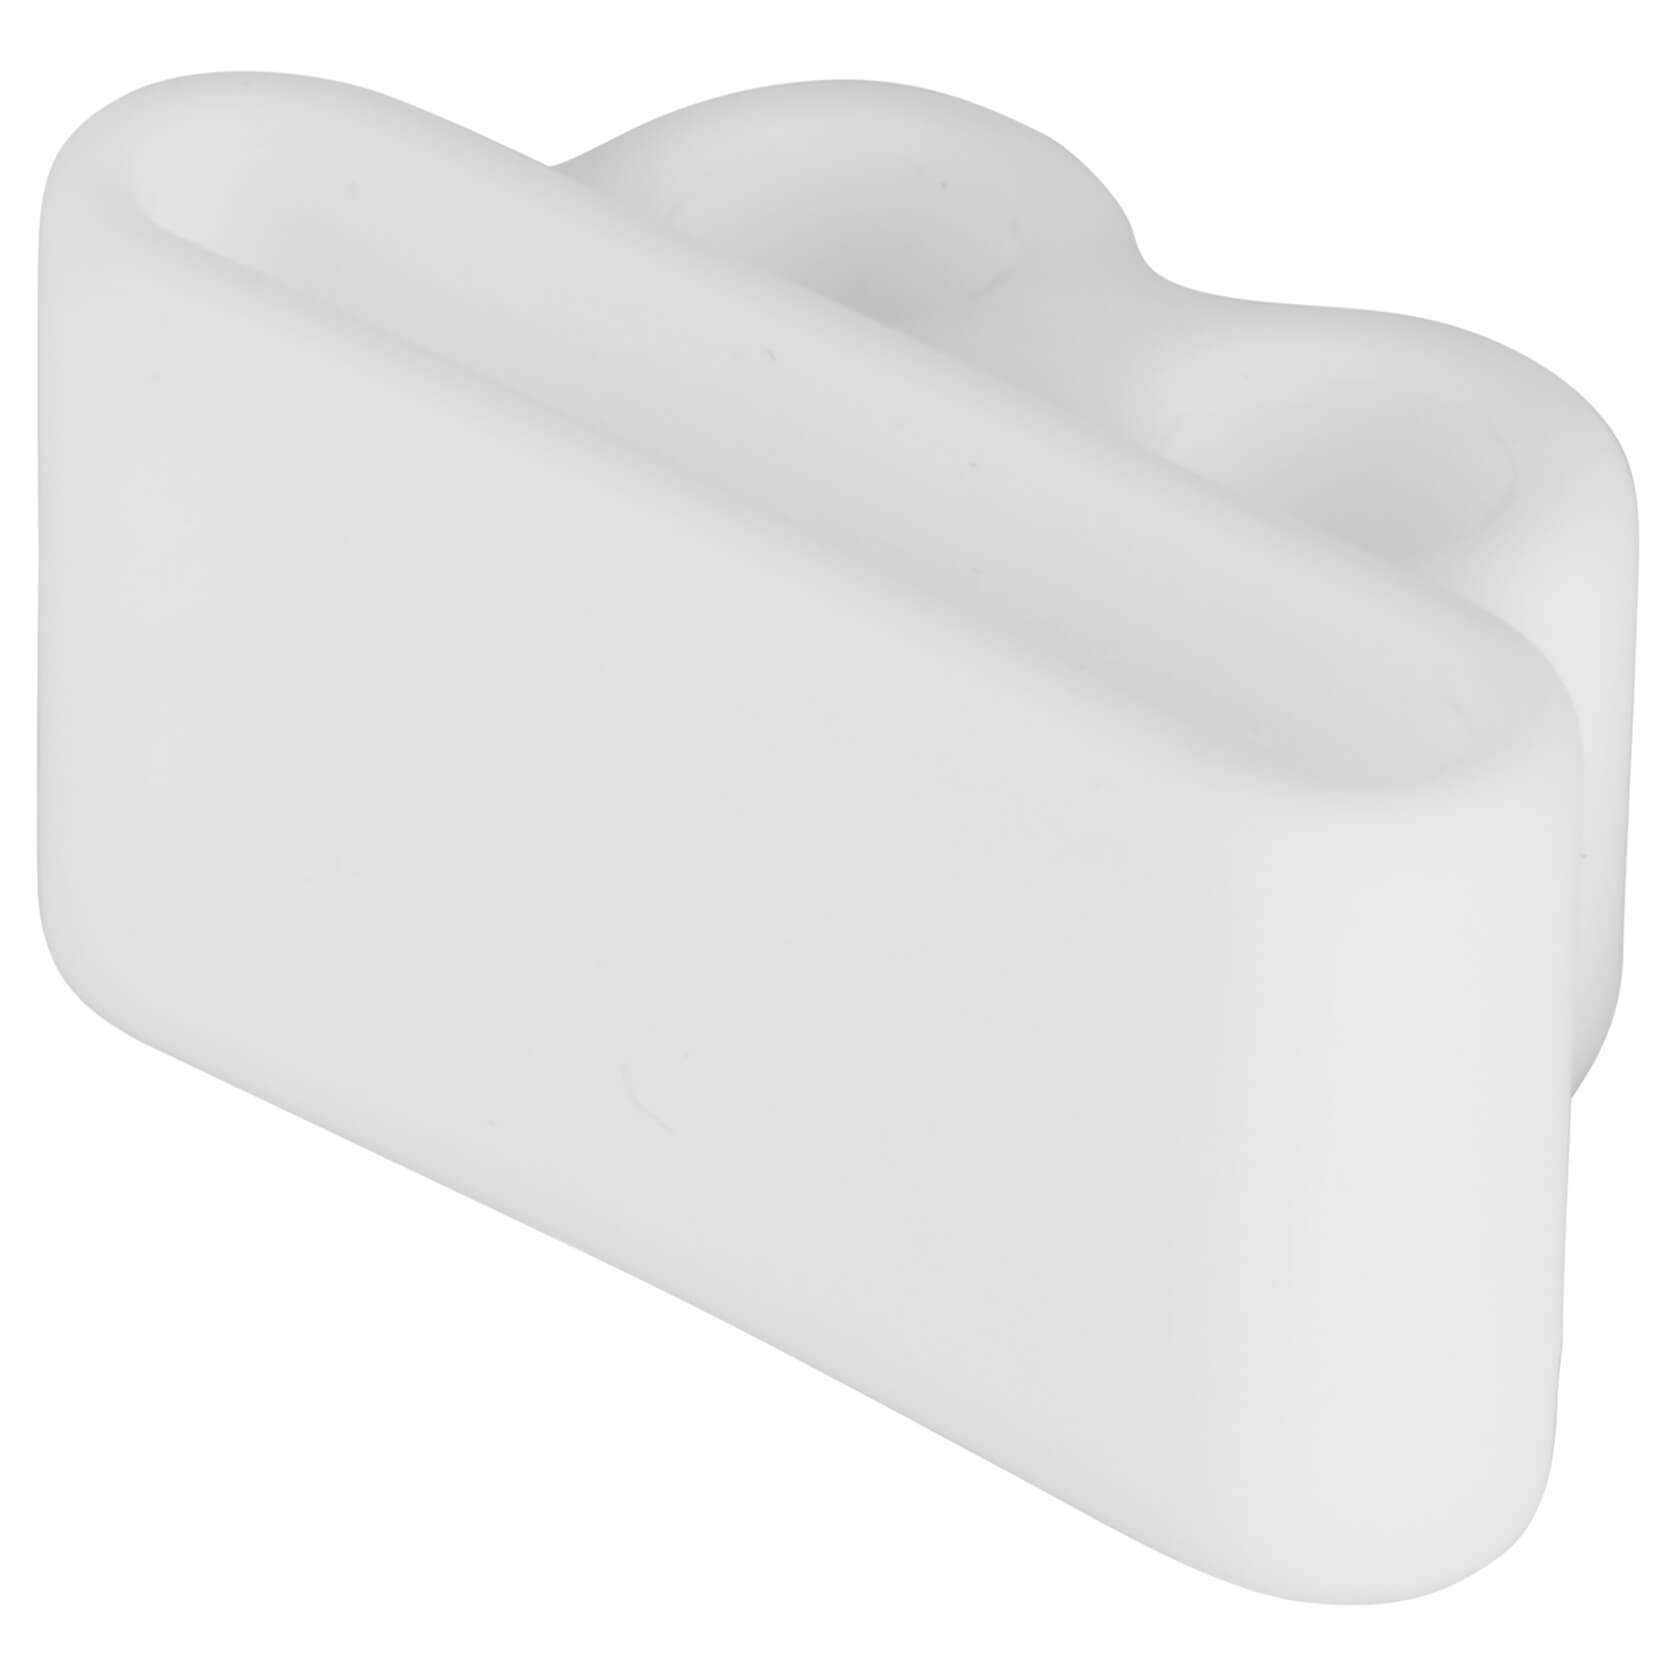 White silicon holder slides on watch band and holds AirPods. color::White